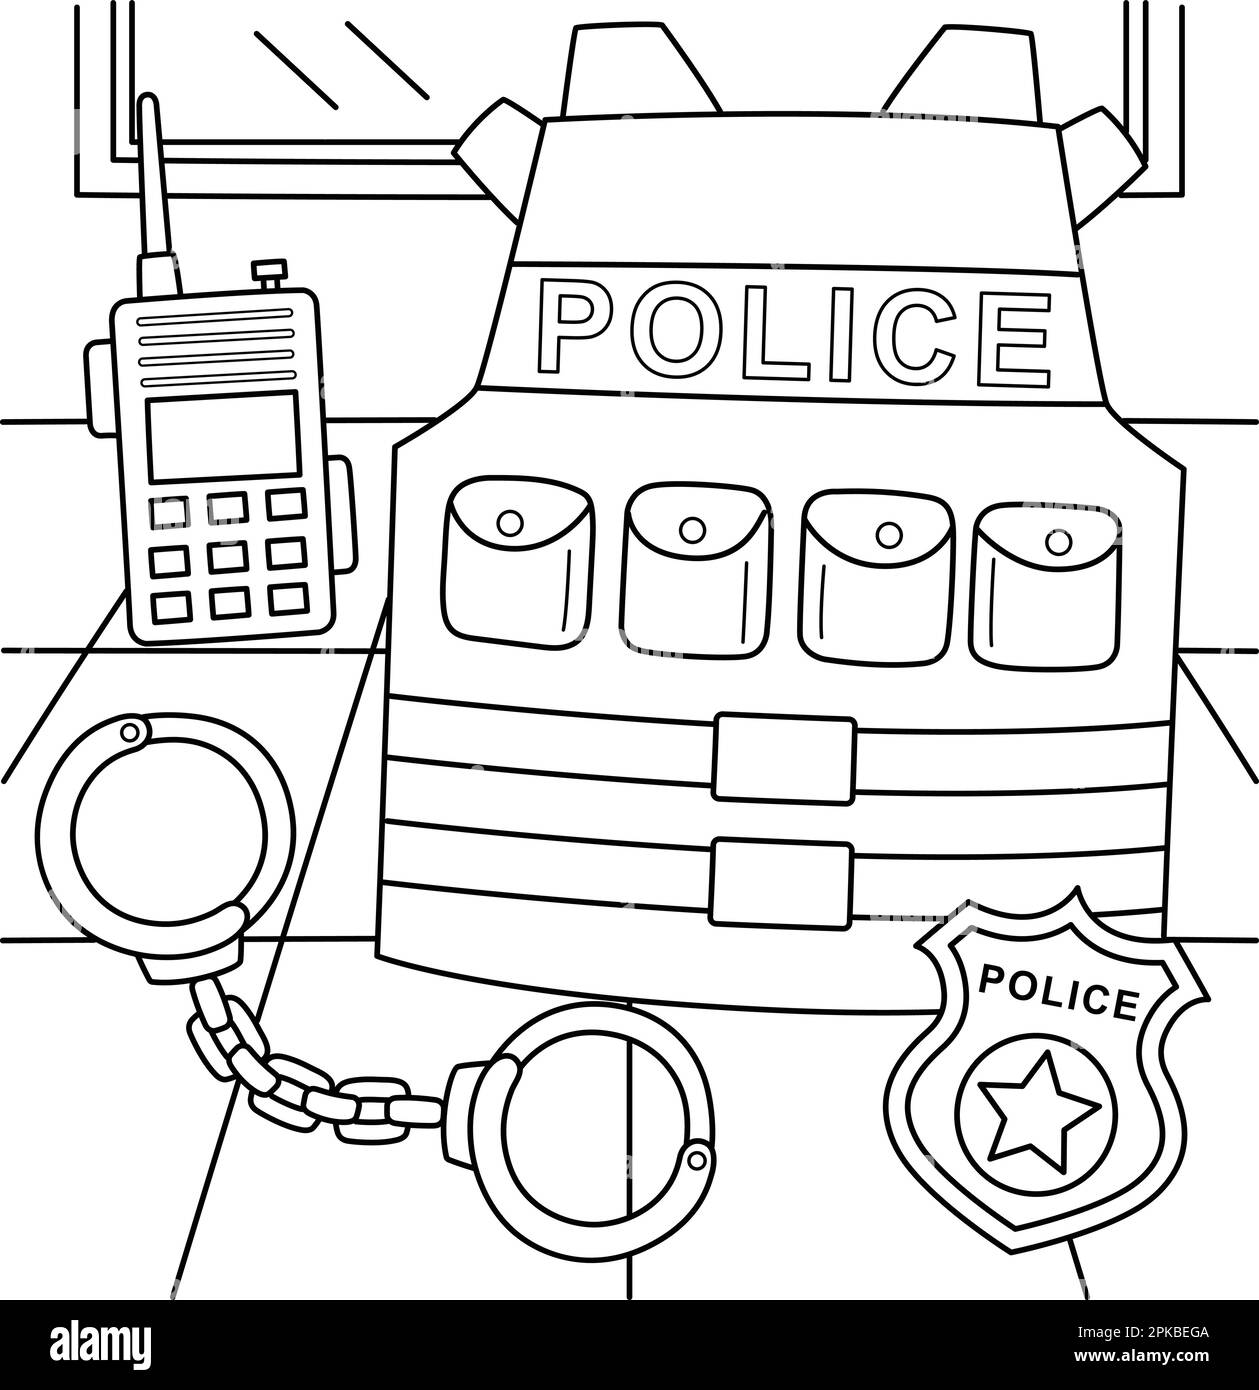 Police officer equipment coloring page for kids stock vector image art